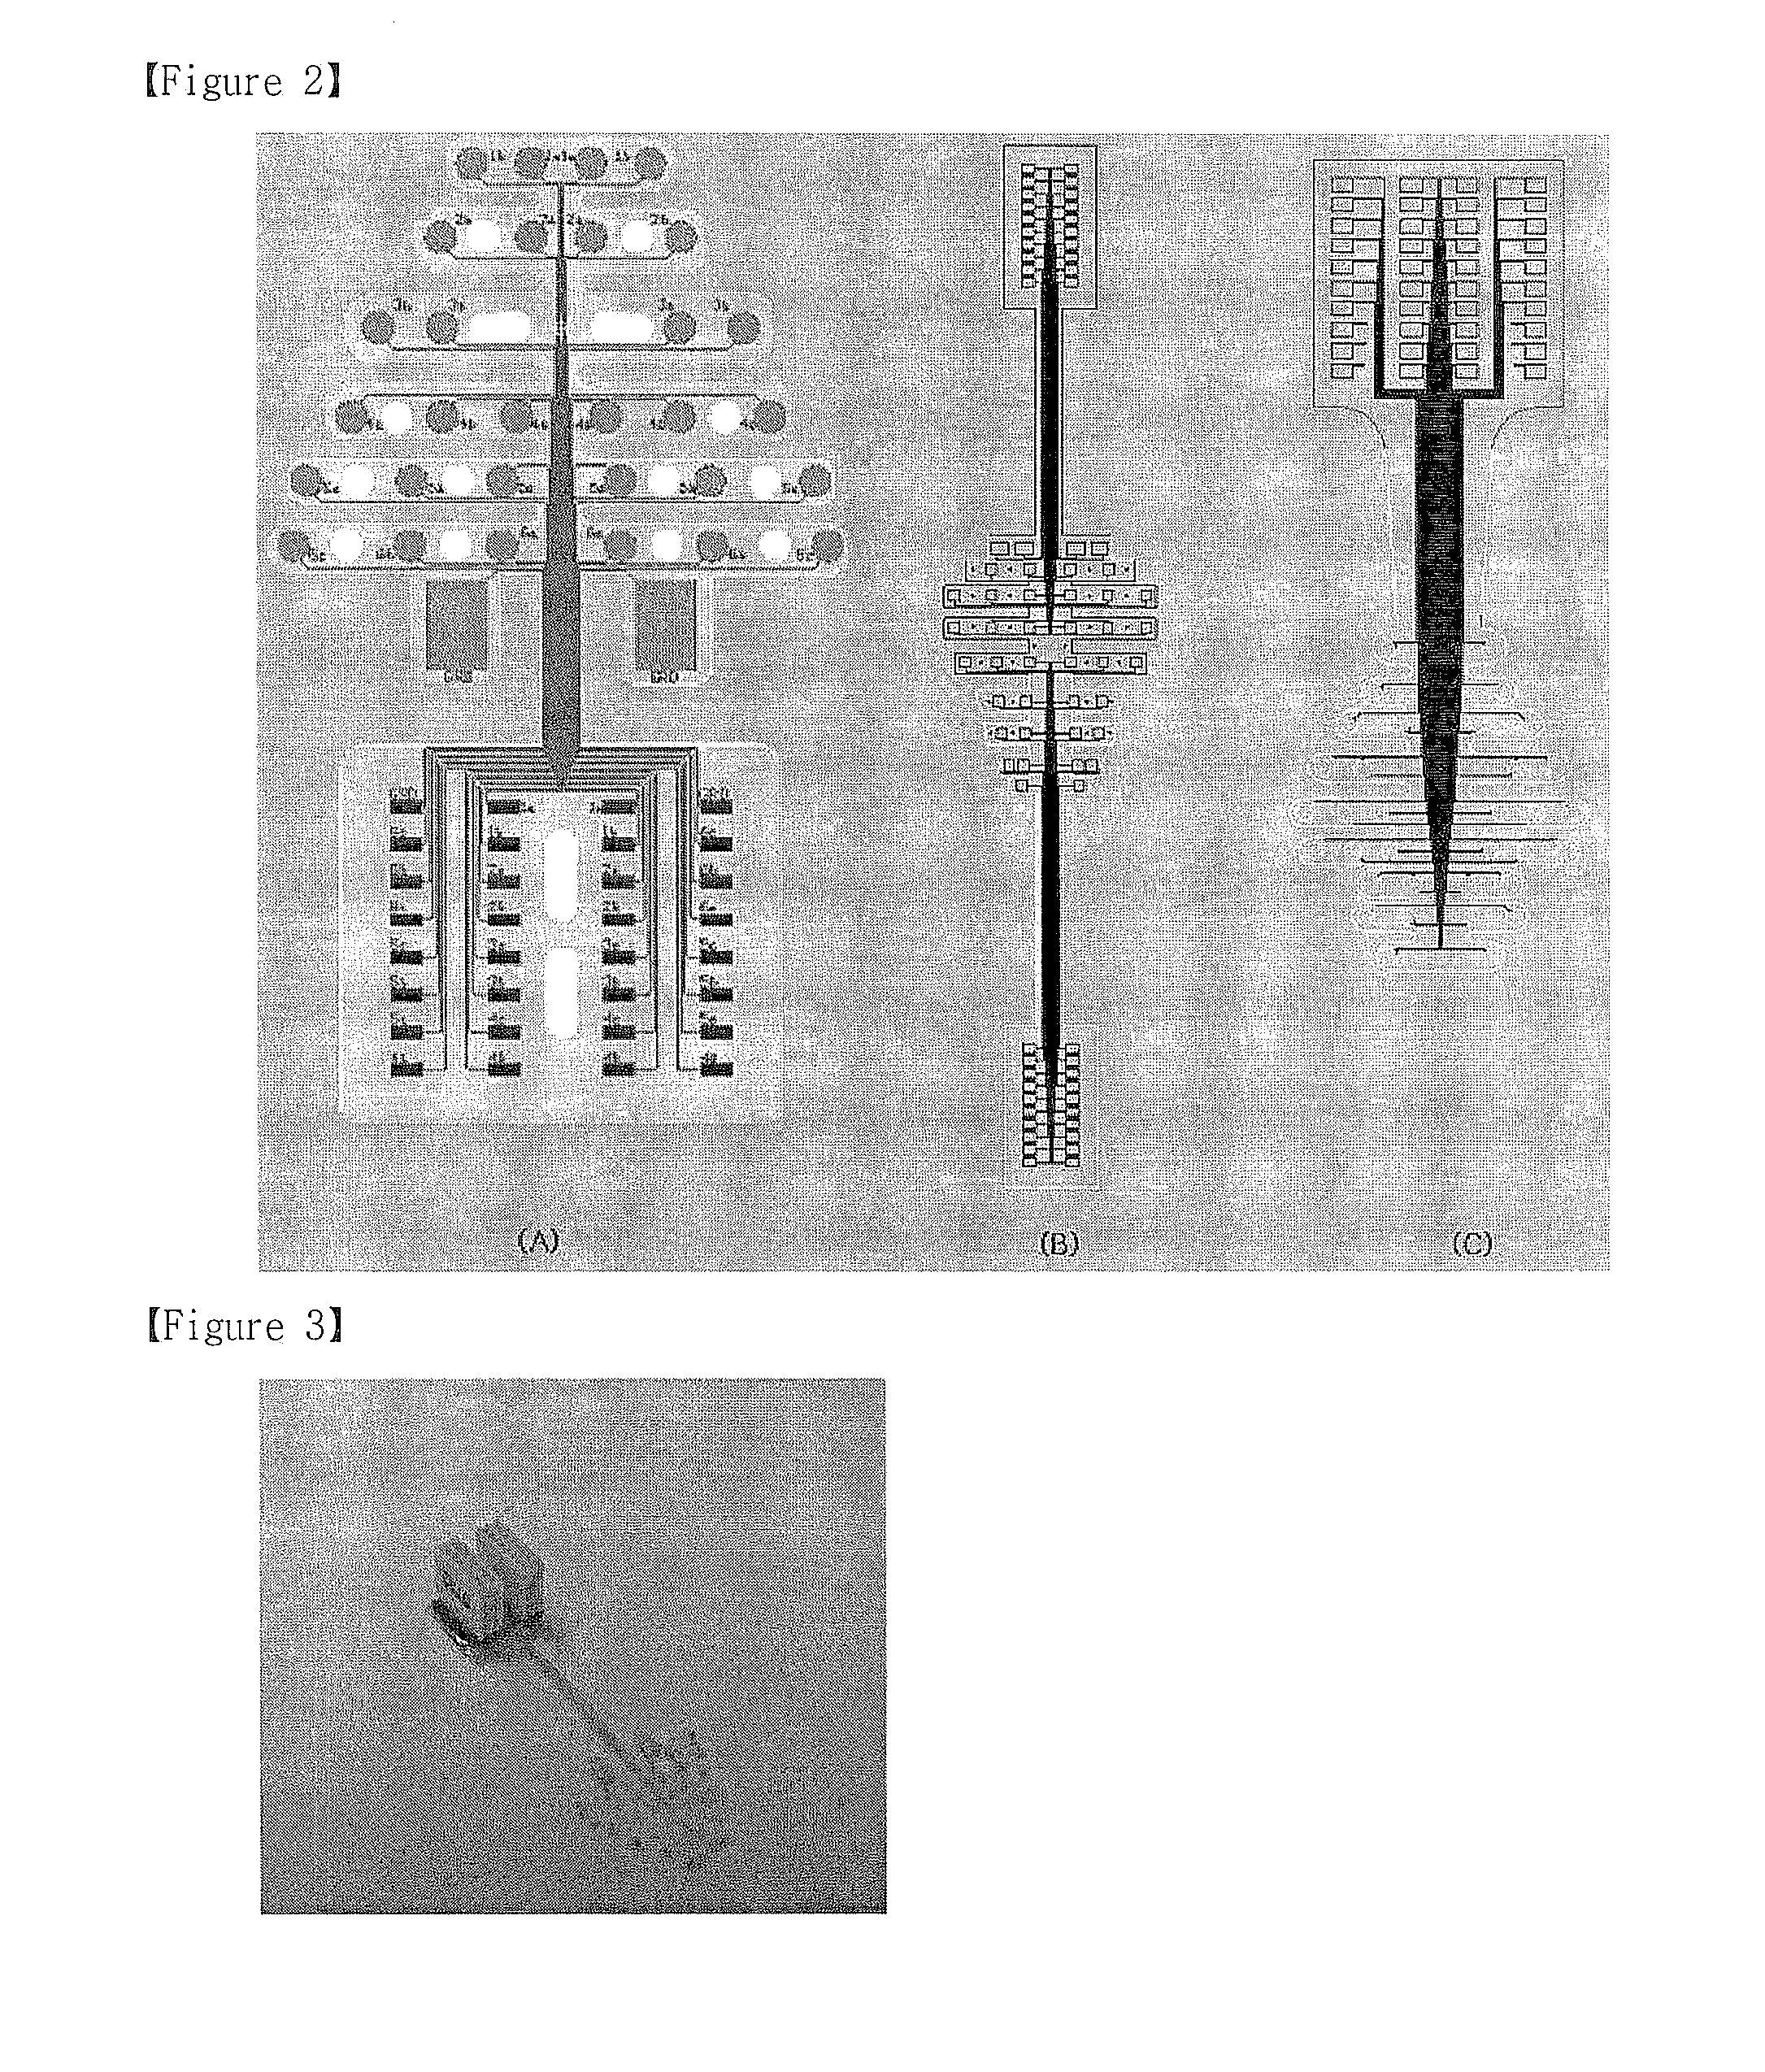 Flexible, multi-channel microelectrode for recording laboratory animal eeg and method for recording laboratory animal eeg using the same